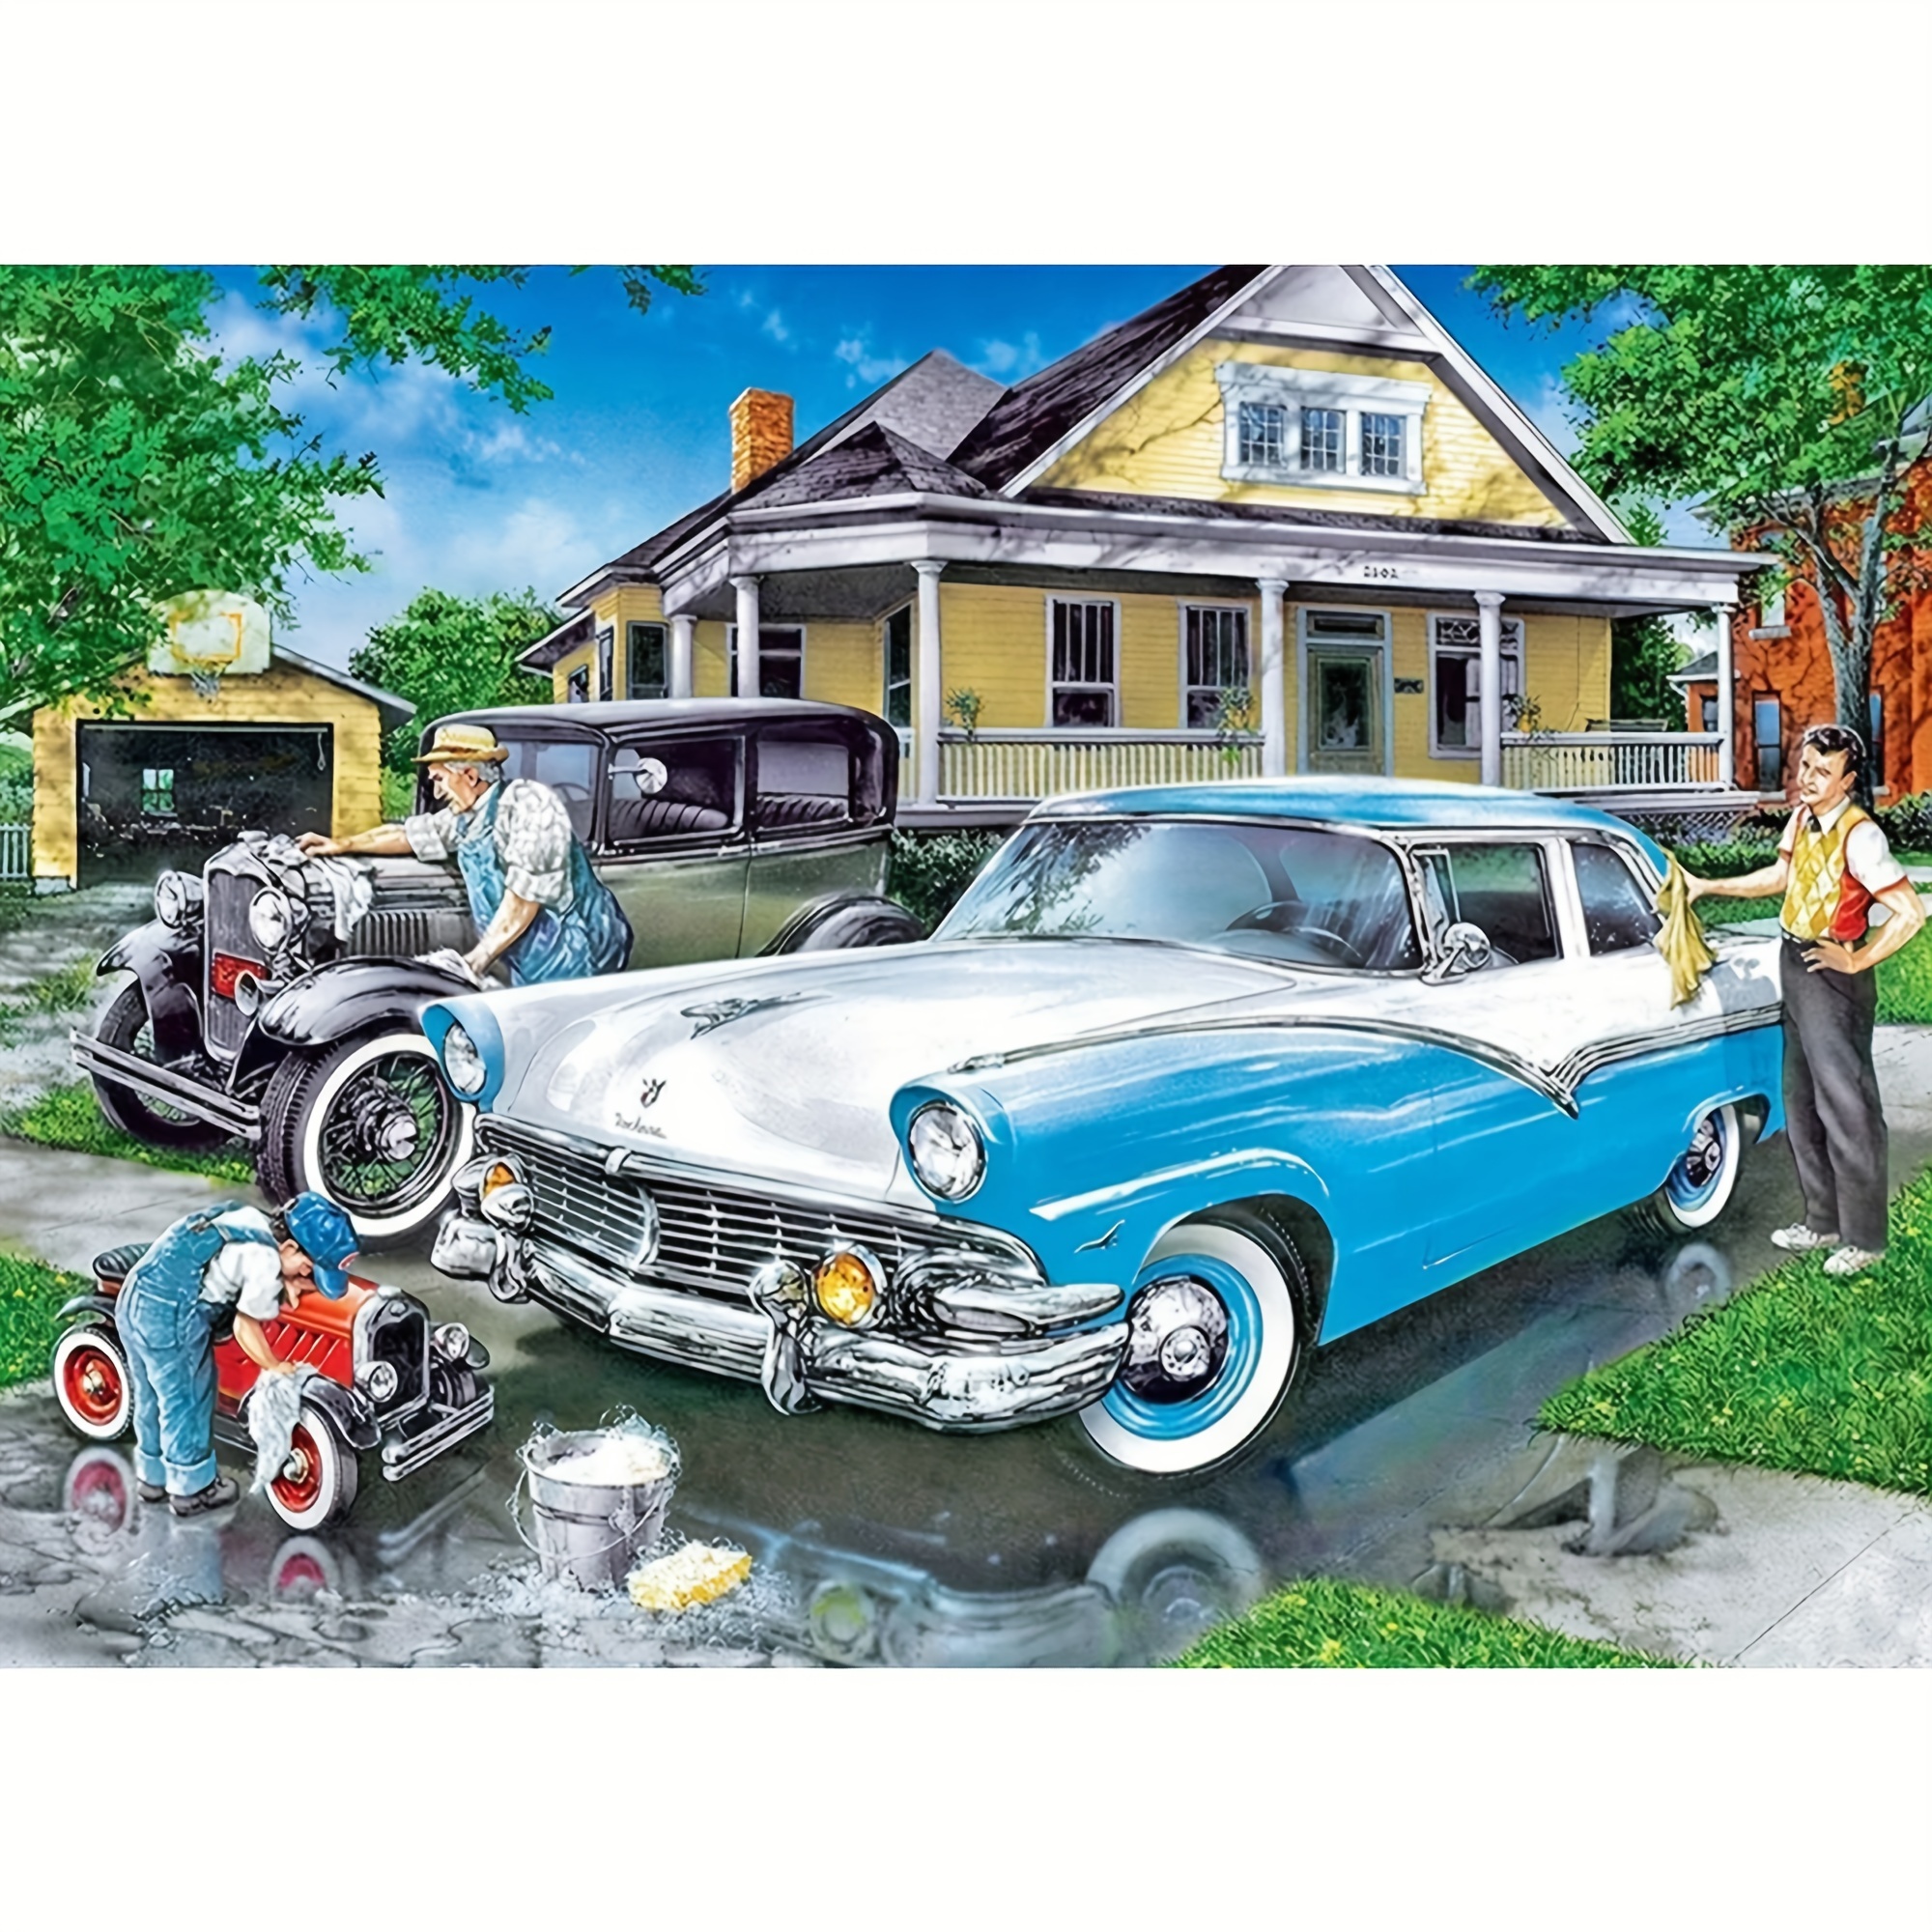 

1pc Vintage Car Pattern Rhinestone Painting Set, Acrylic Full Round Rhinestone Inlaid Painting Mosaic Making Crafts,suitable For Giving Gifts To Relatives And Friends. Frameless